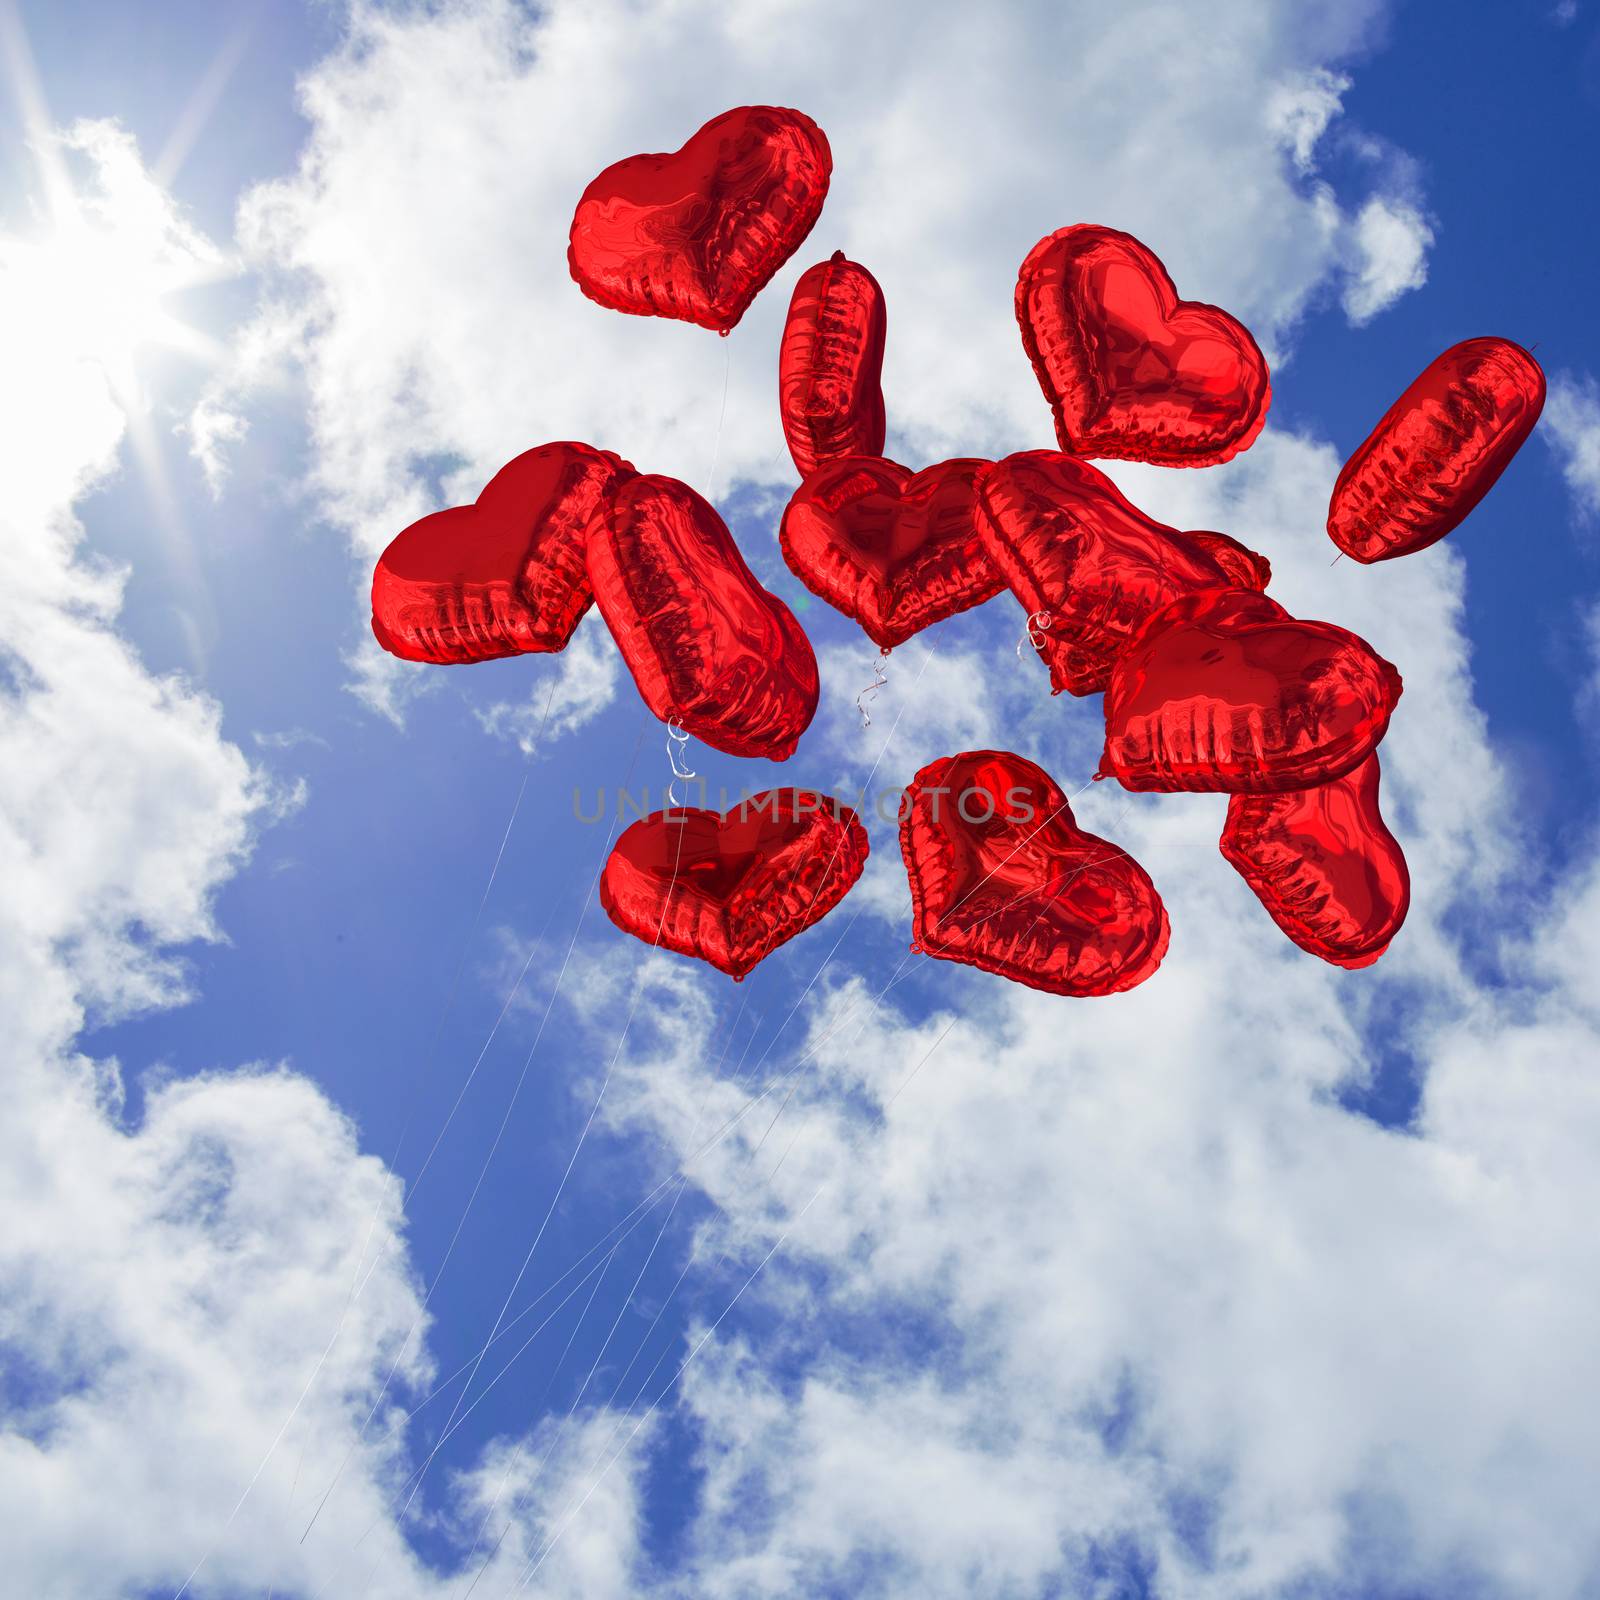 Heart balloons against bright blue sky with clouds